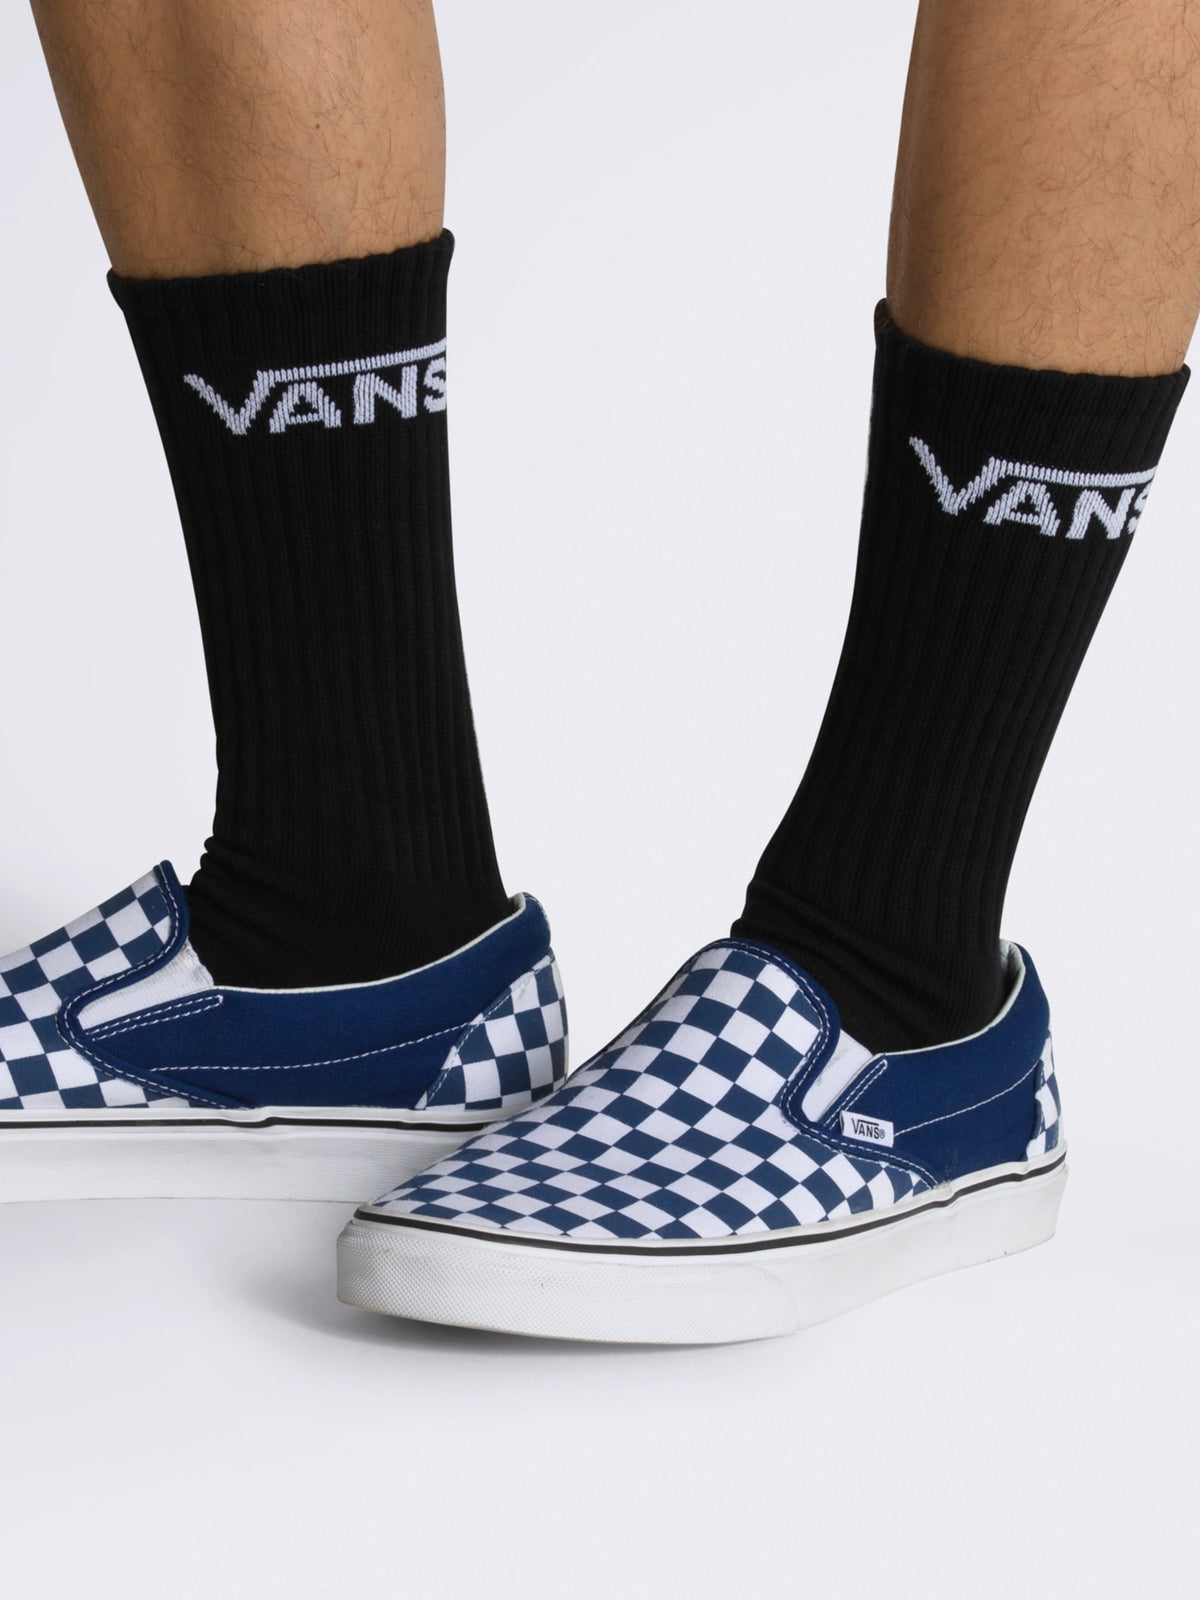 VANS CLASSIC CREW 3 | Footwear SOCKS PACK Boathouse Collective